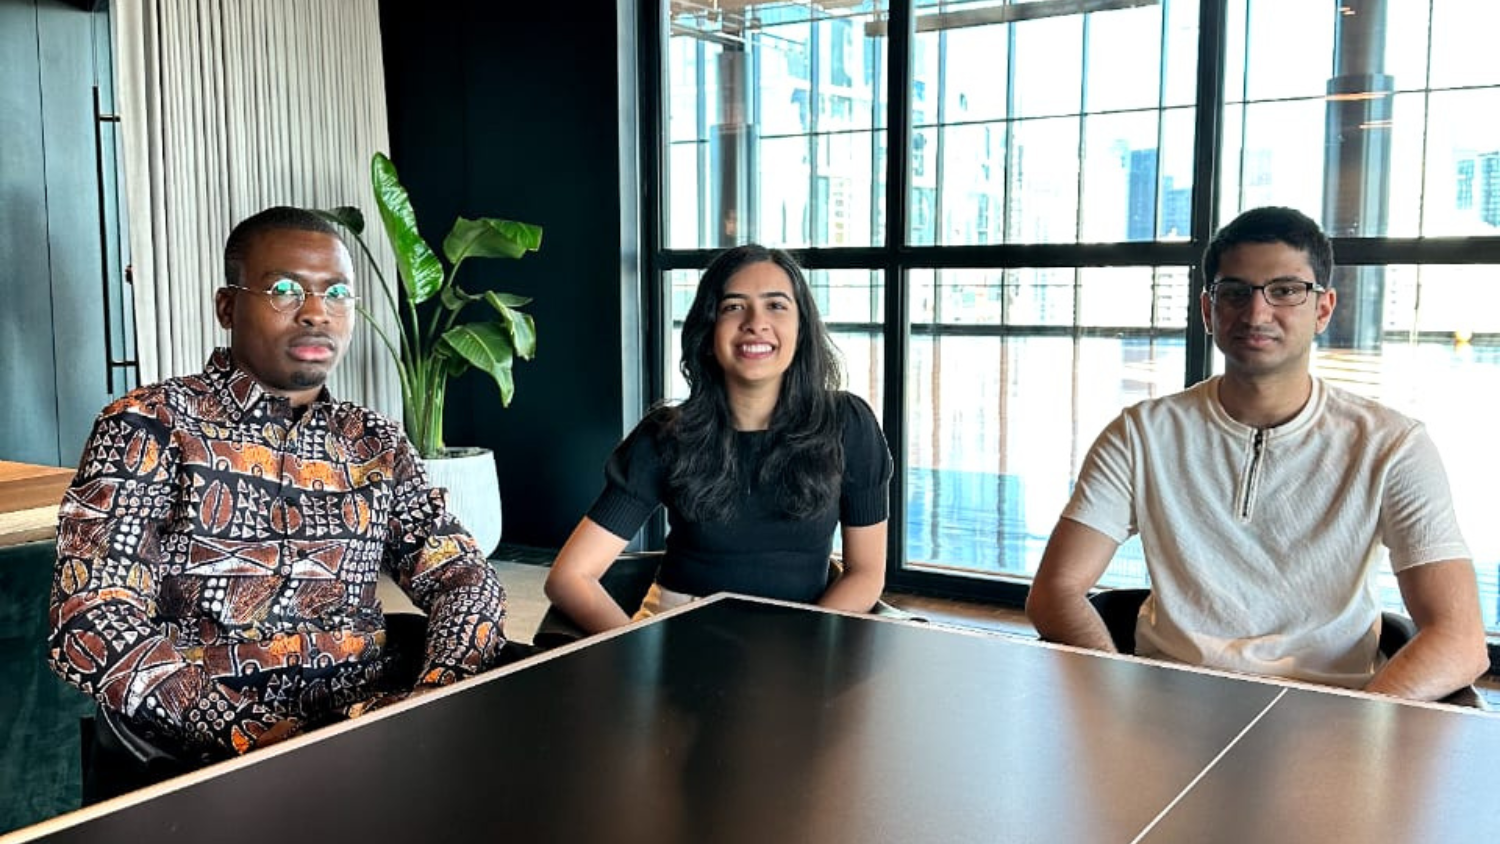 Rivet co-founders Anj Fayemi, Simran Pabla and Saad Rahman sit around a table in an office.